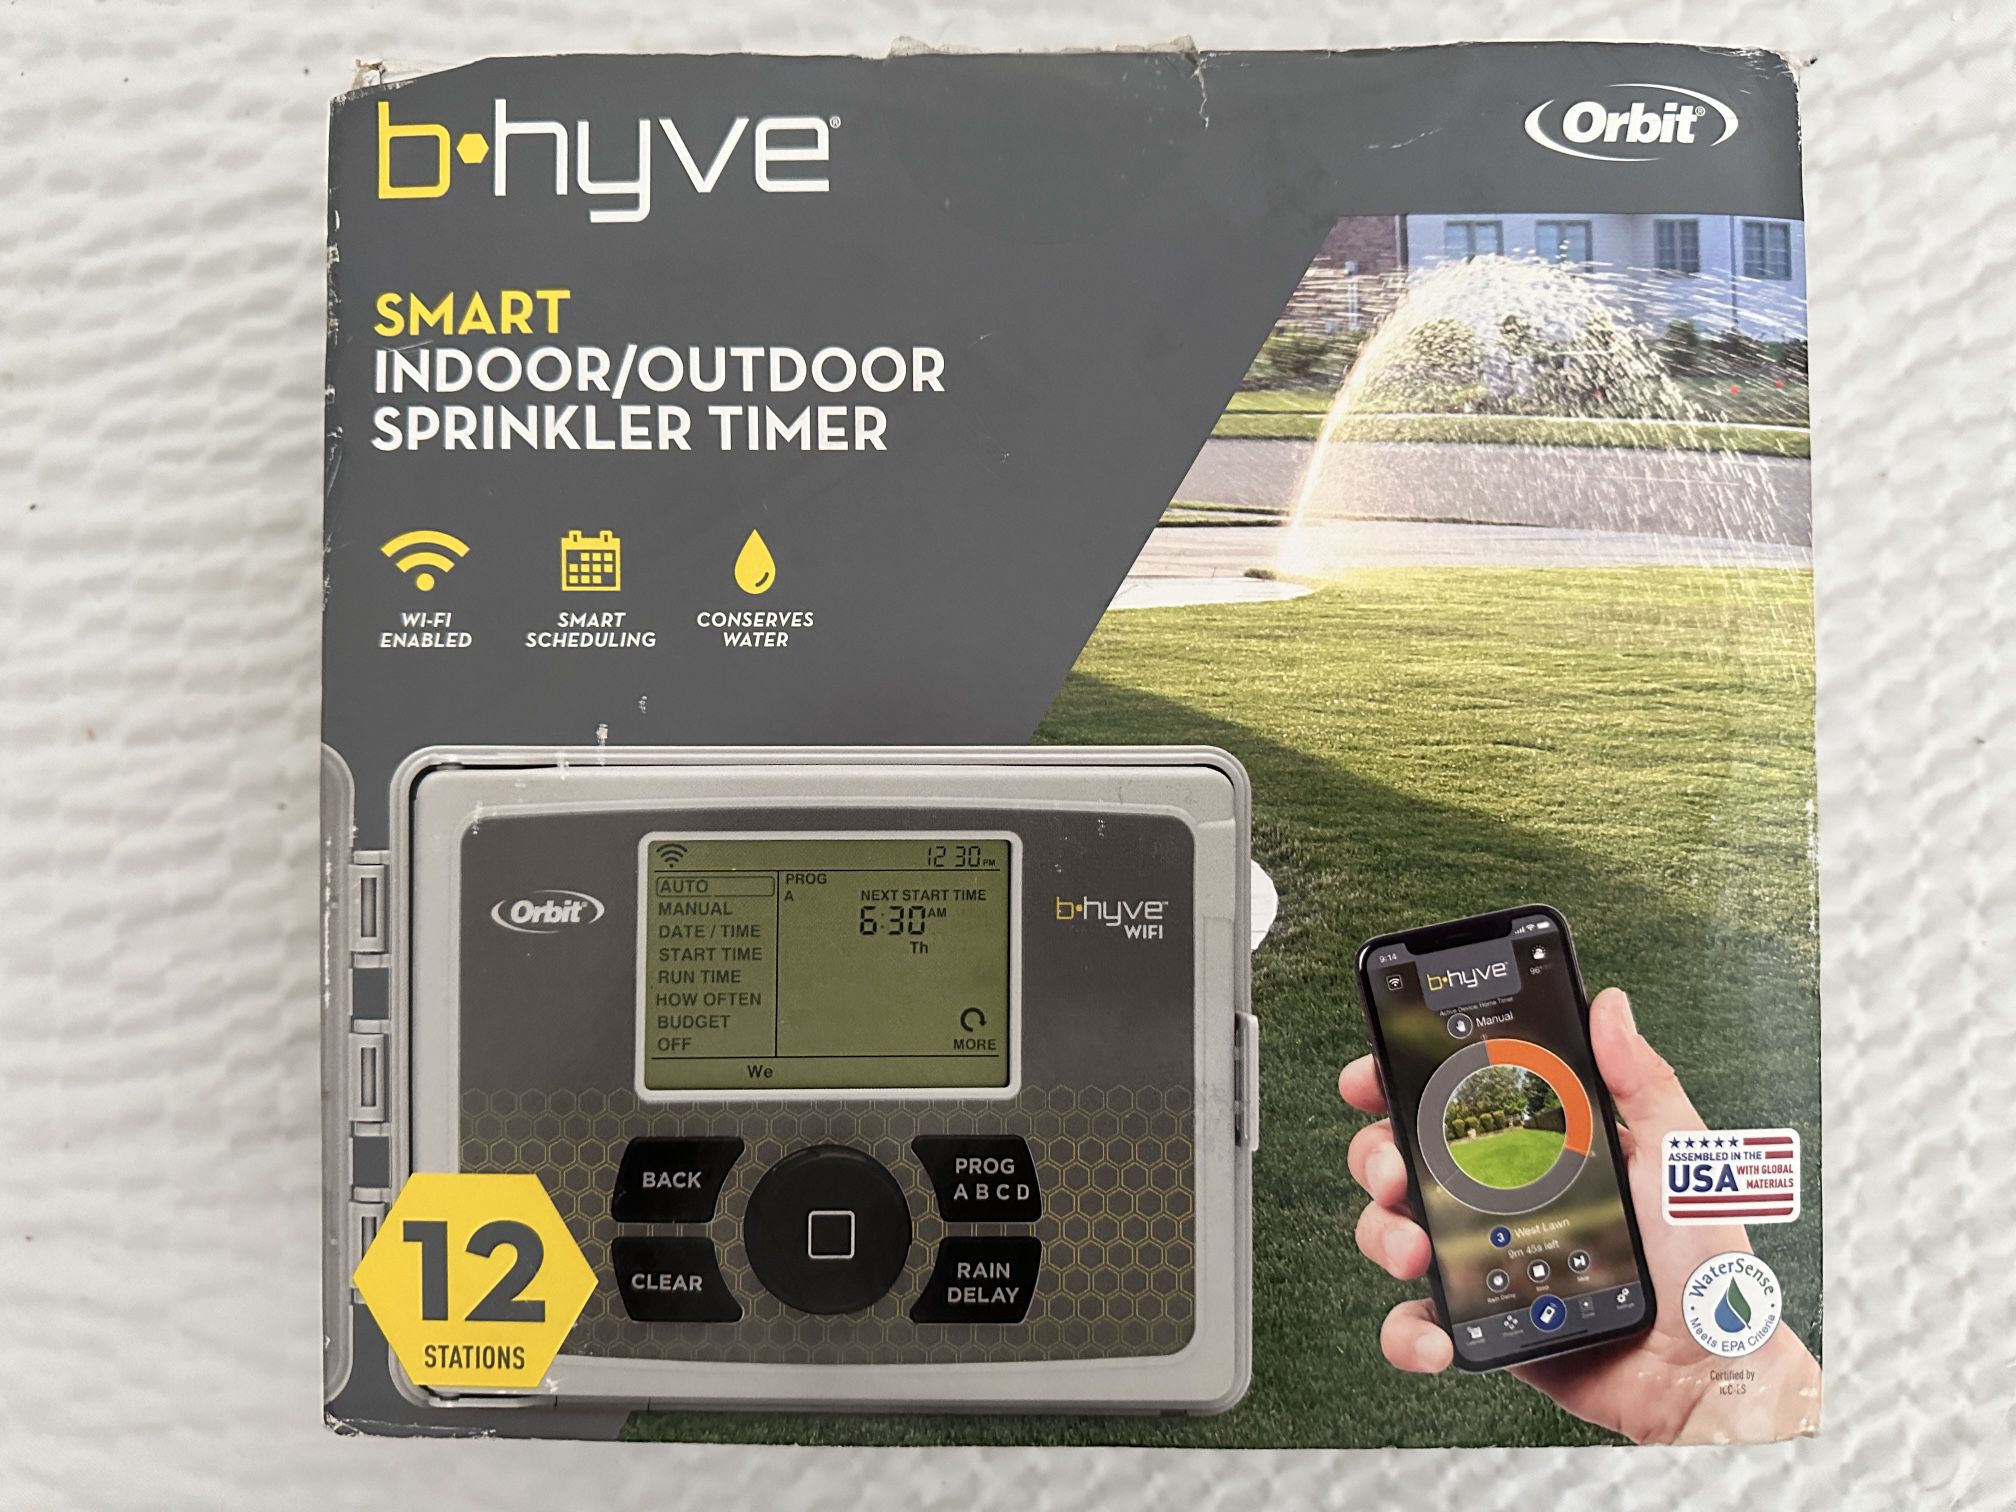 Orbit B-hyve 12-Zone Indoor/Outdoor Smart Sprinkler Controller, Works with Amazon Alexa New Wi-Fi Fully functional with Android, iOS for total control